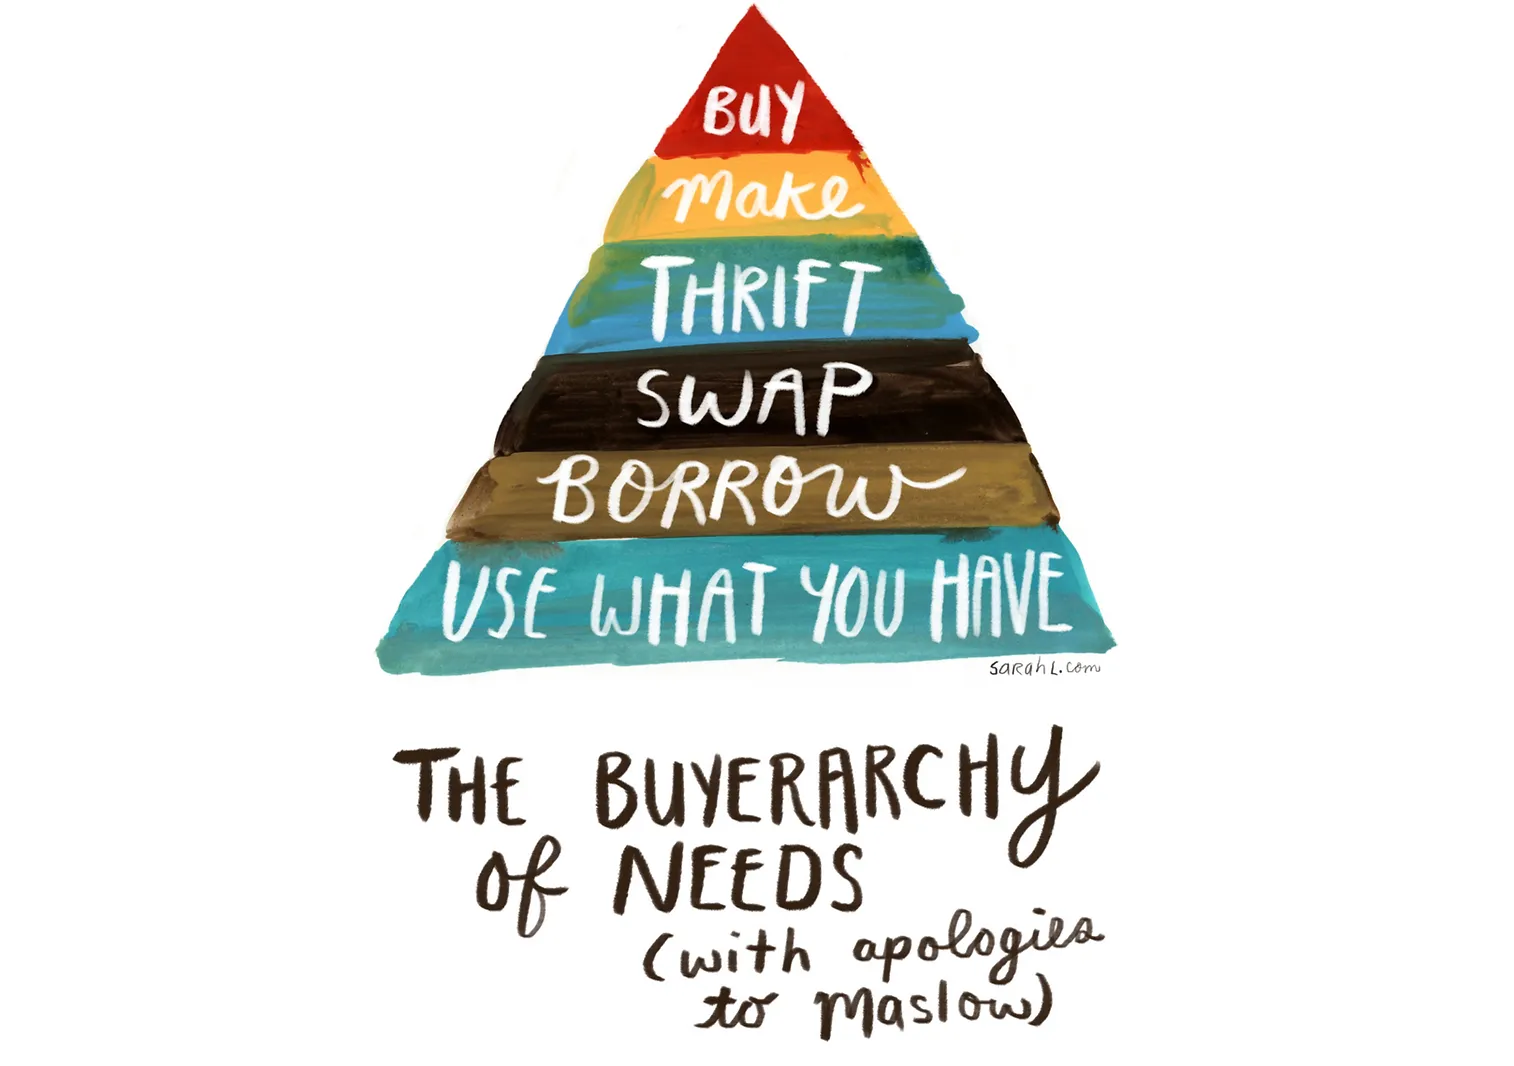 Art showing a hierarchy, from "buy" to "use what you have", of how to get things you need